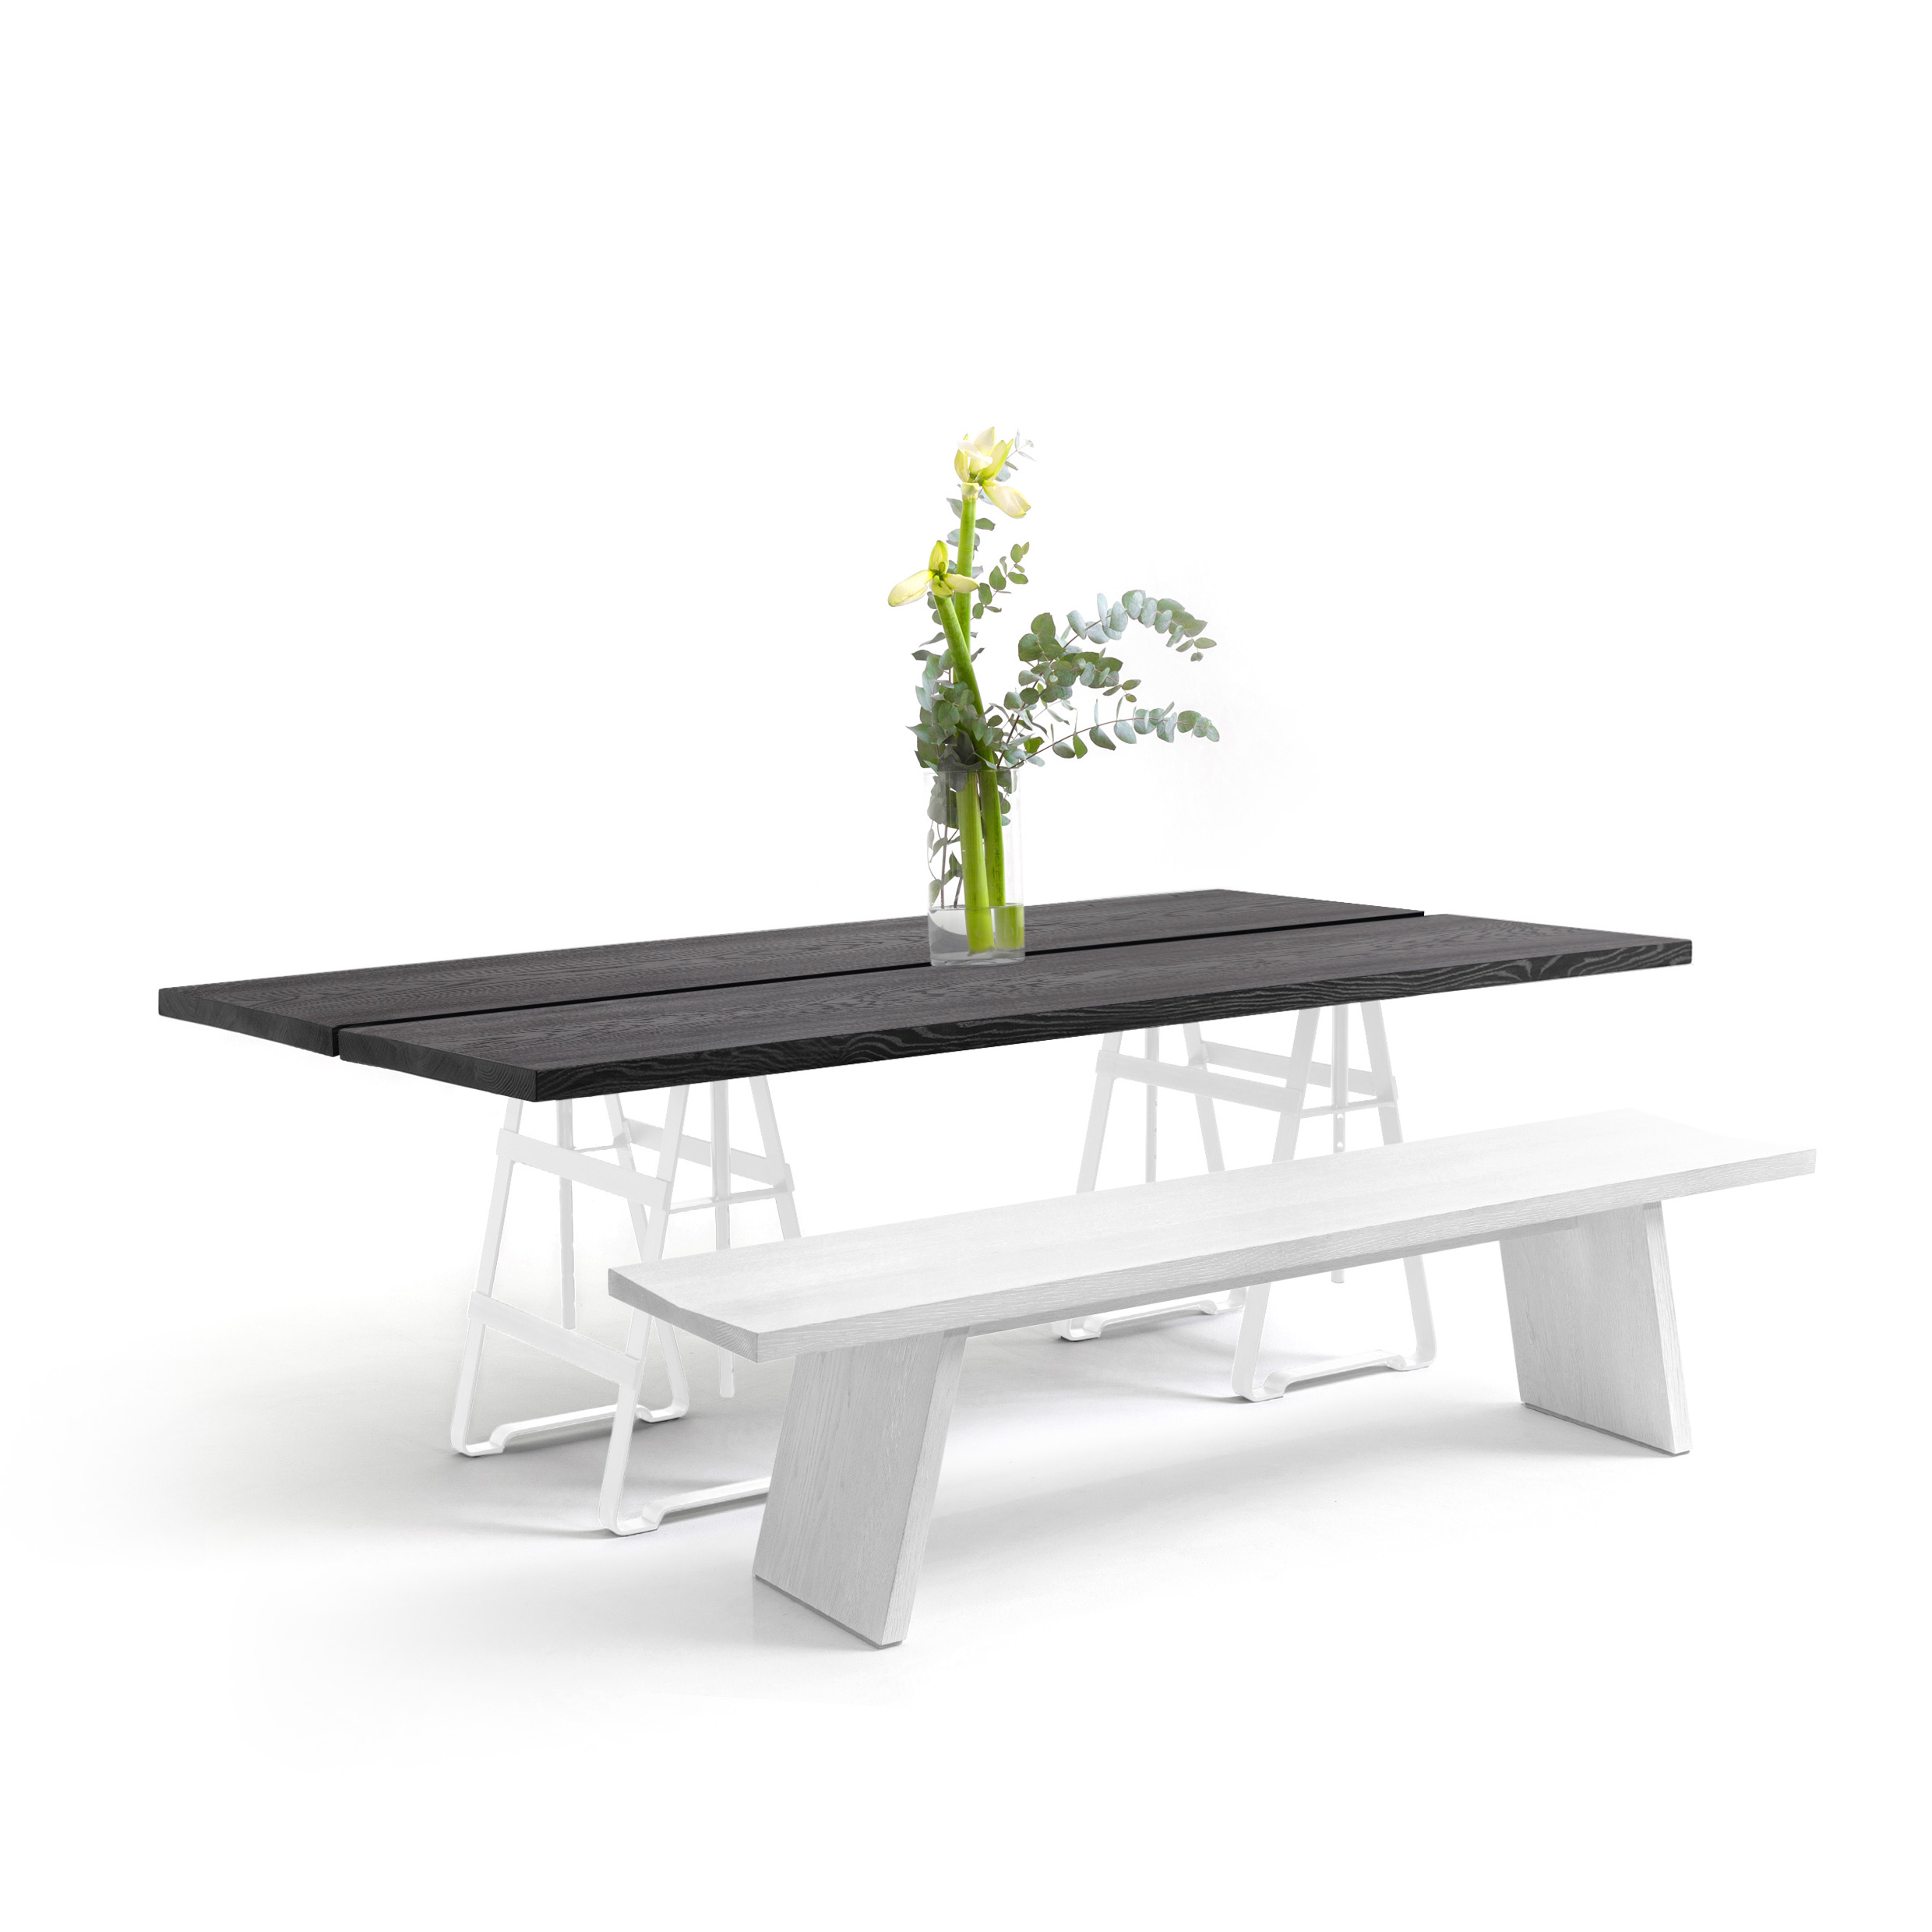 FORM EXCLUSIVE // JOON - IN-/OUTDOOR TABLE | BLACK CARED - 240CM X 45CM X 5CM - PAINT MONKEY WHITE